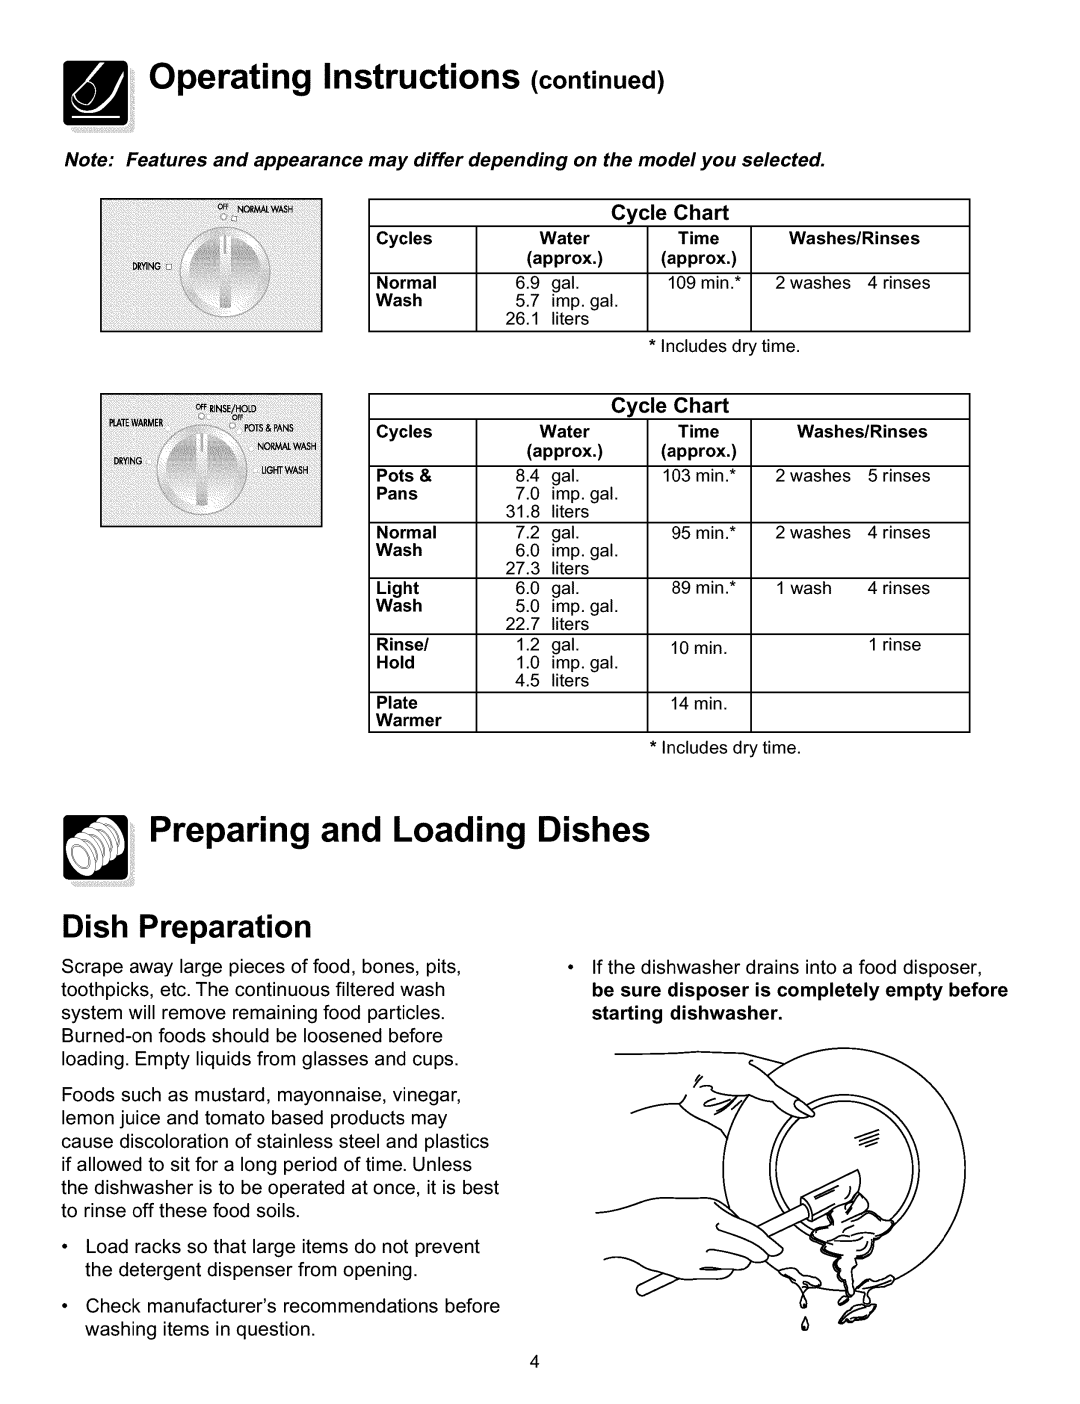 Frigidaire 154428101 warranty Operating Instructions continued, Preparing and Loading Dishes, Dish Preparation 